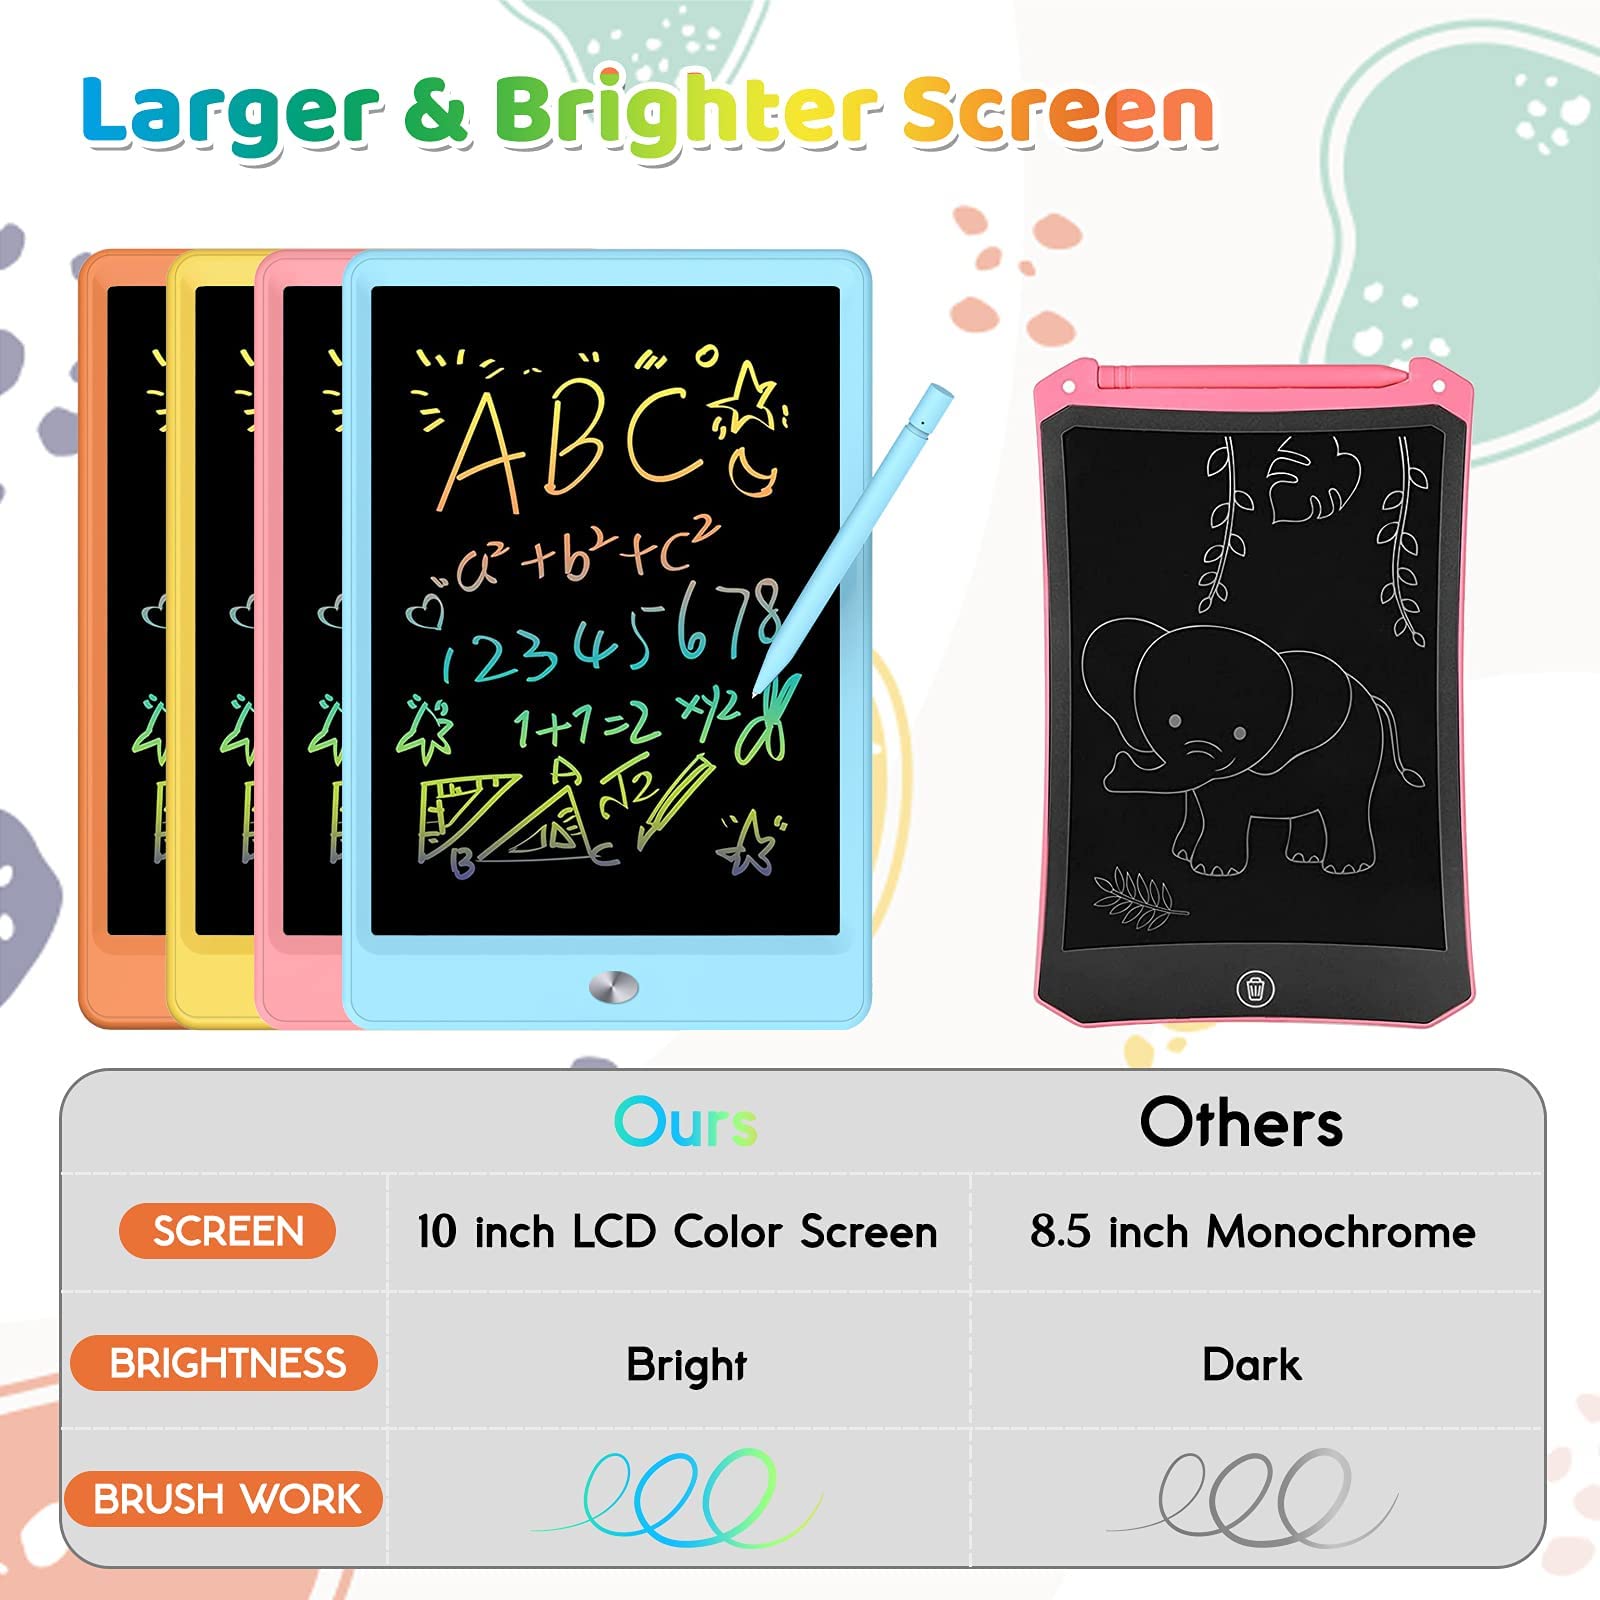 ORSEN LCD Writing Tablet 10 Inch, Colorful Doodle Board Drawing Pad for Kids, Drawing Board Writing Board Drawing Tablet, Educational Christmas Boys Toys Gifts for 3 4 5 6 Year Old Boys, Girls